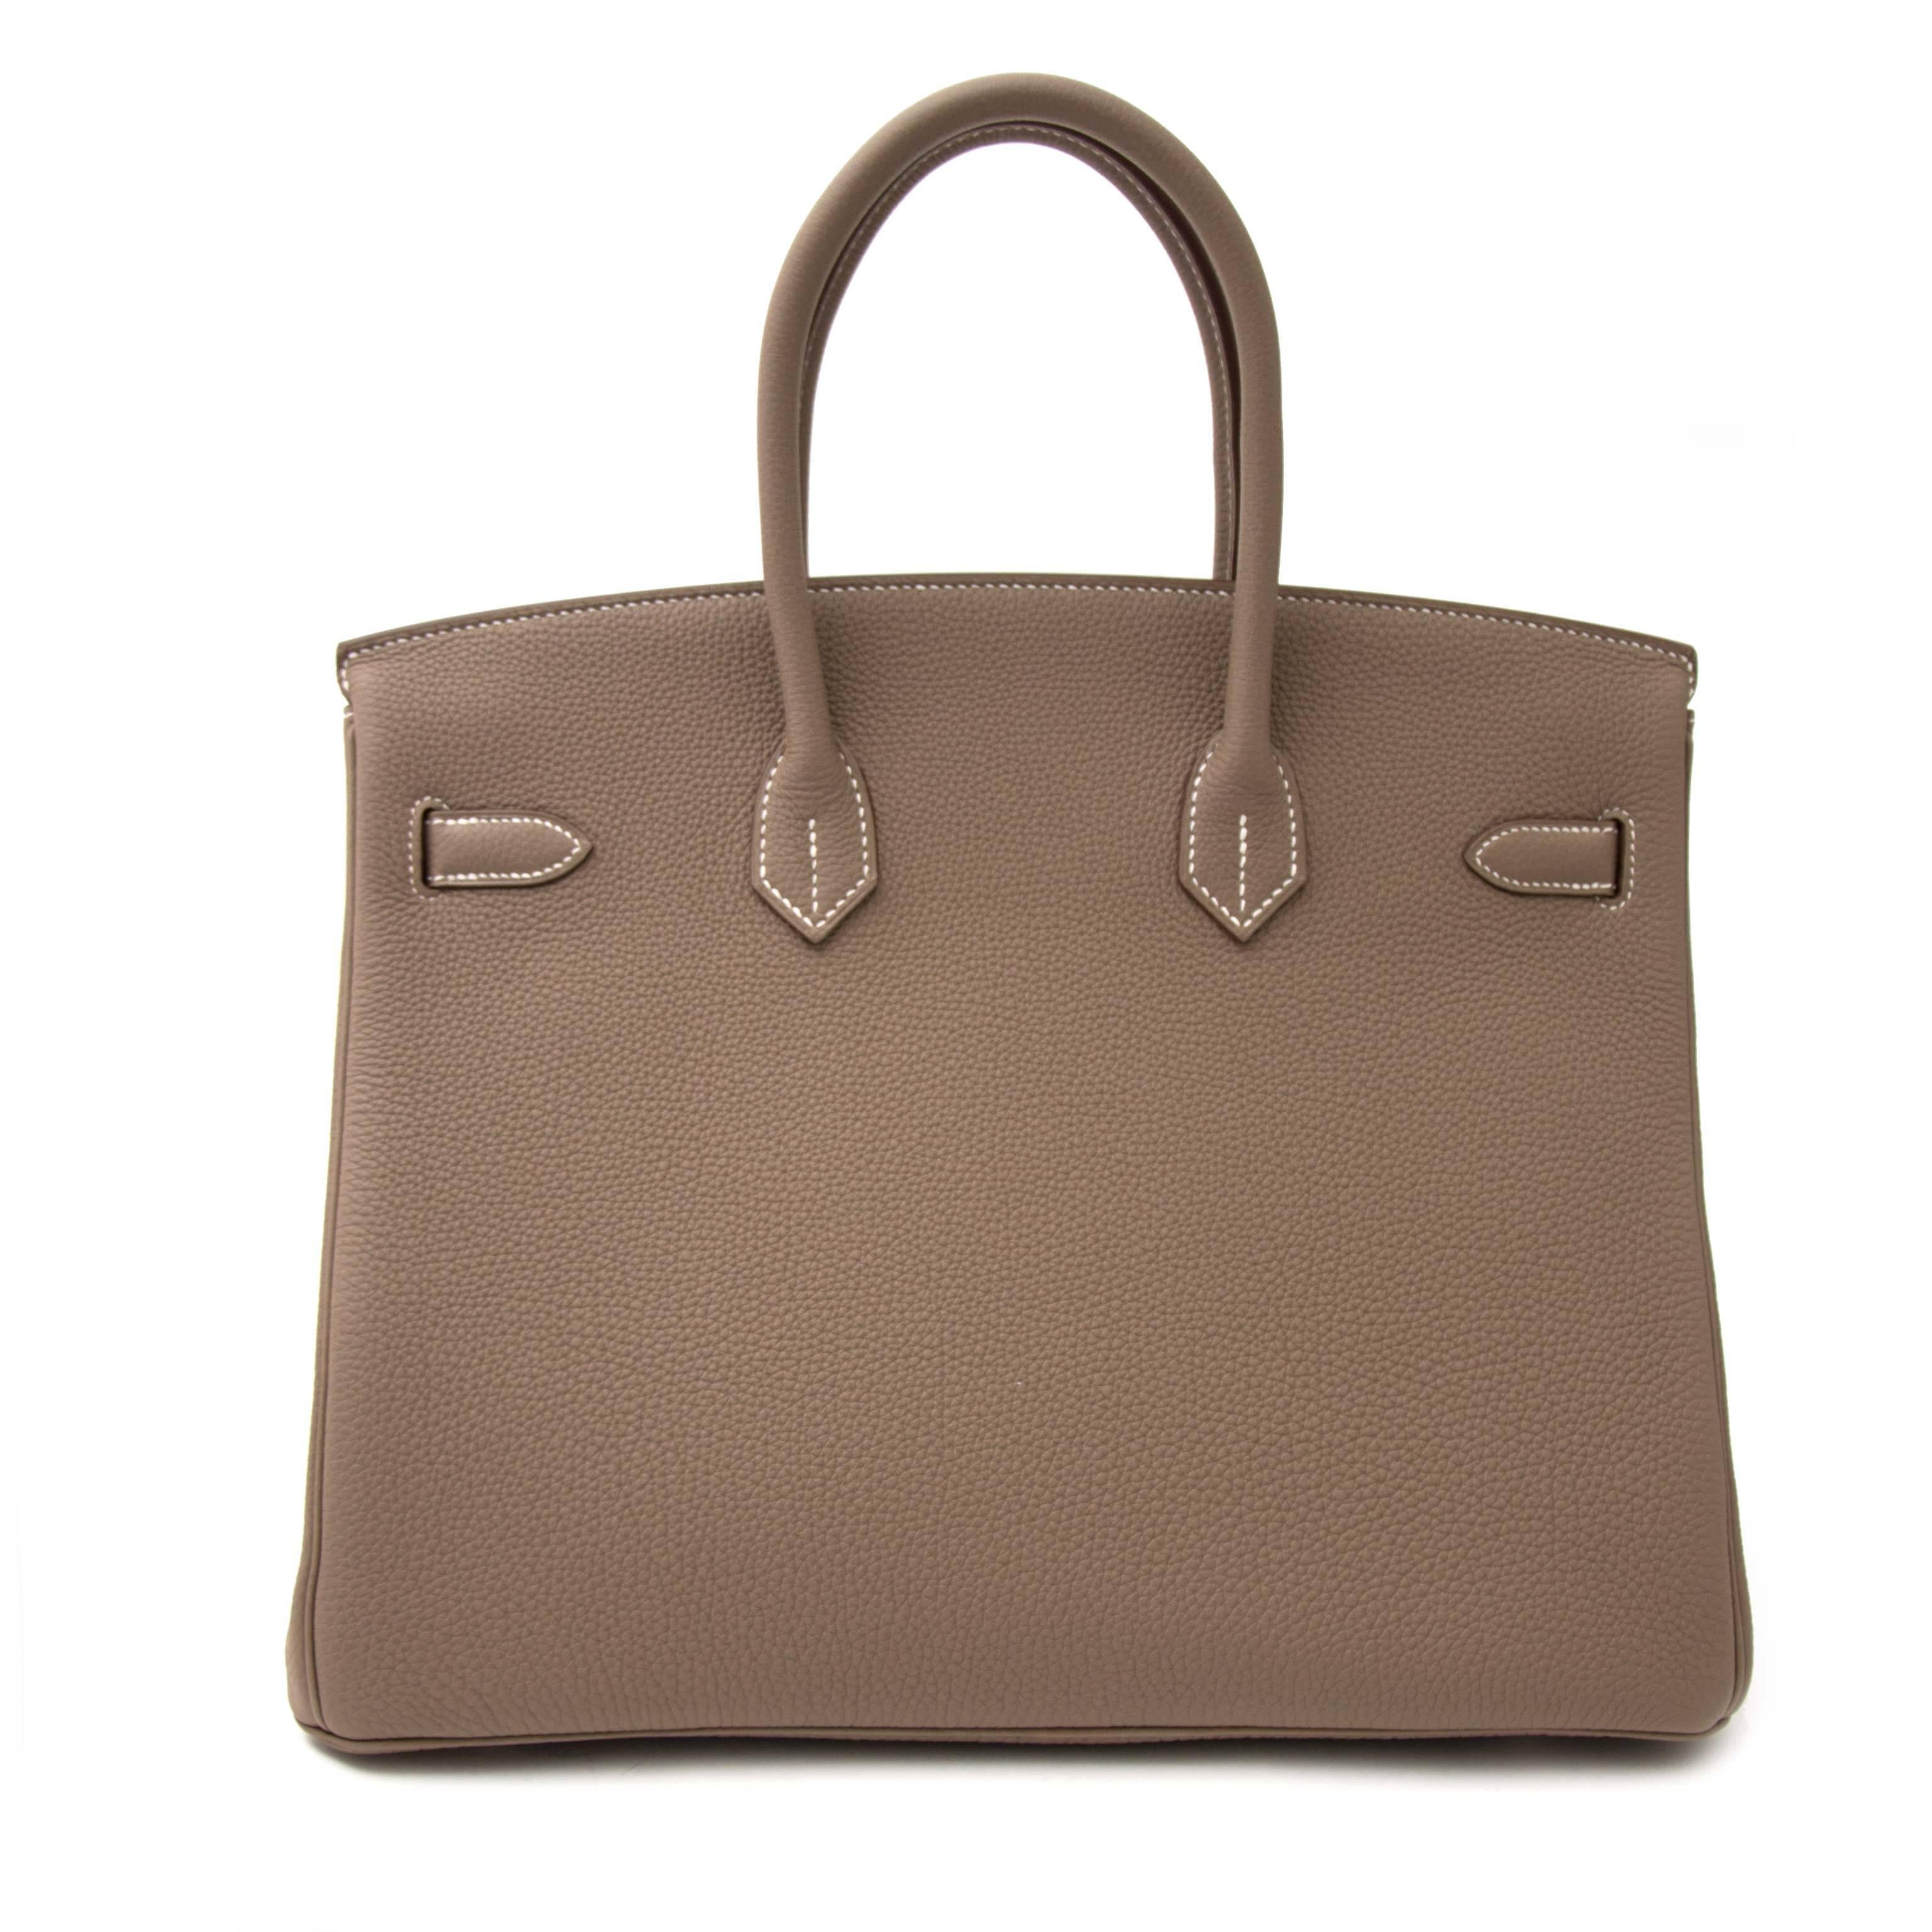 Skip the waiting list and get your hands on one of the most wanted bags of the century: the Hermes Birkin. This gorgeous top handle bag is crafted from fine Togo leather and comes in a perfect neutral Etoupe. The palladium hardware adds a certain